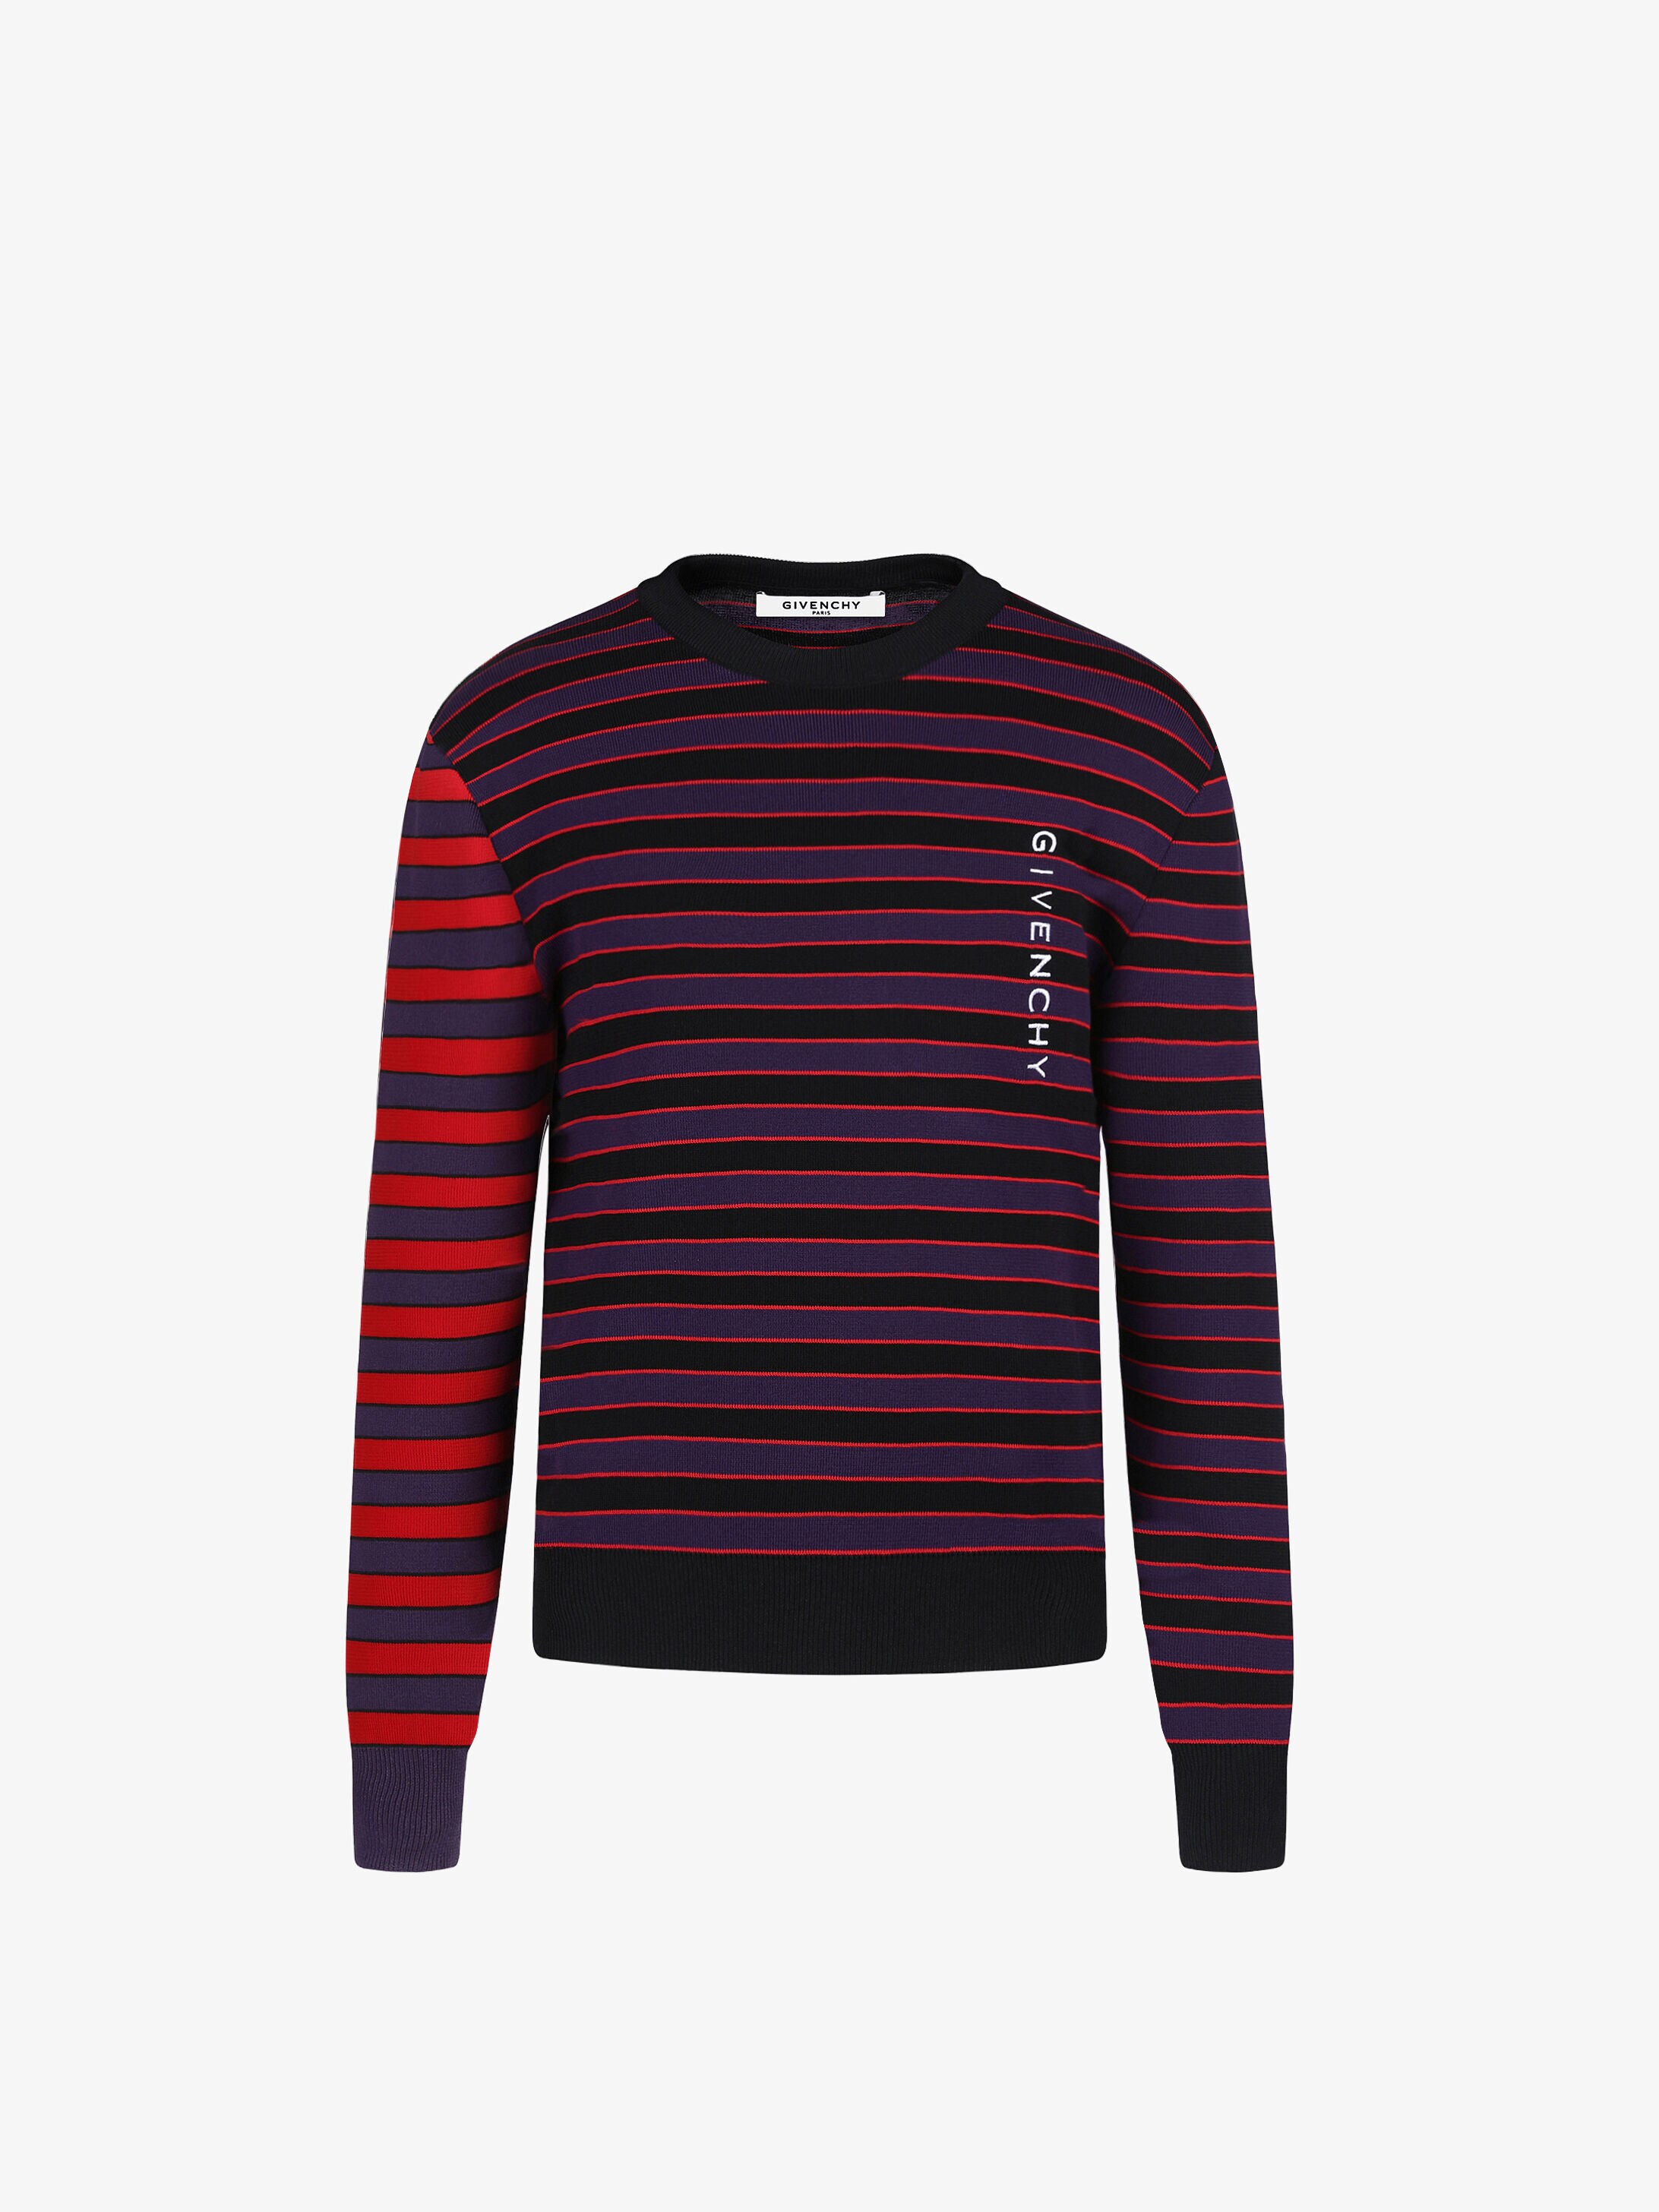 GIVENCHY striped sweater | GIVENCHY Paris